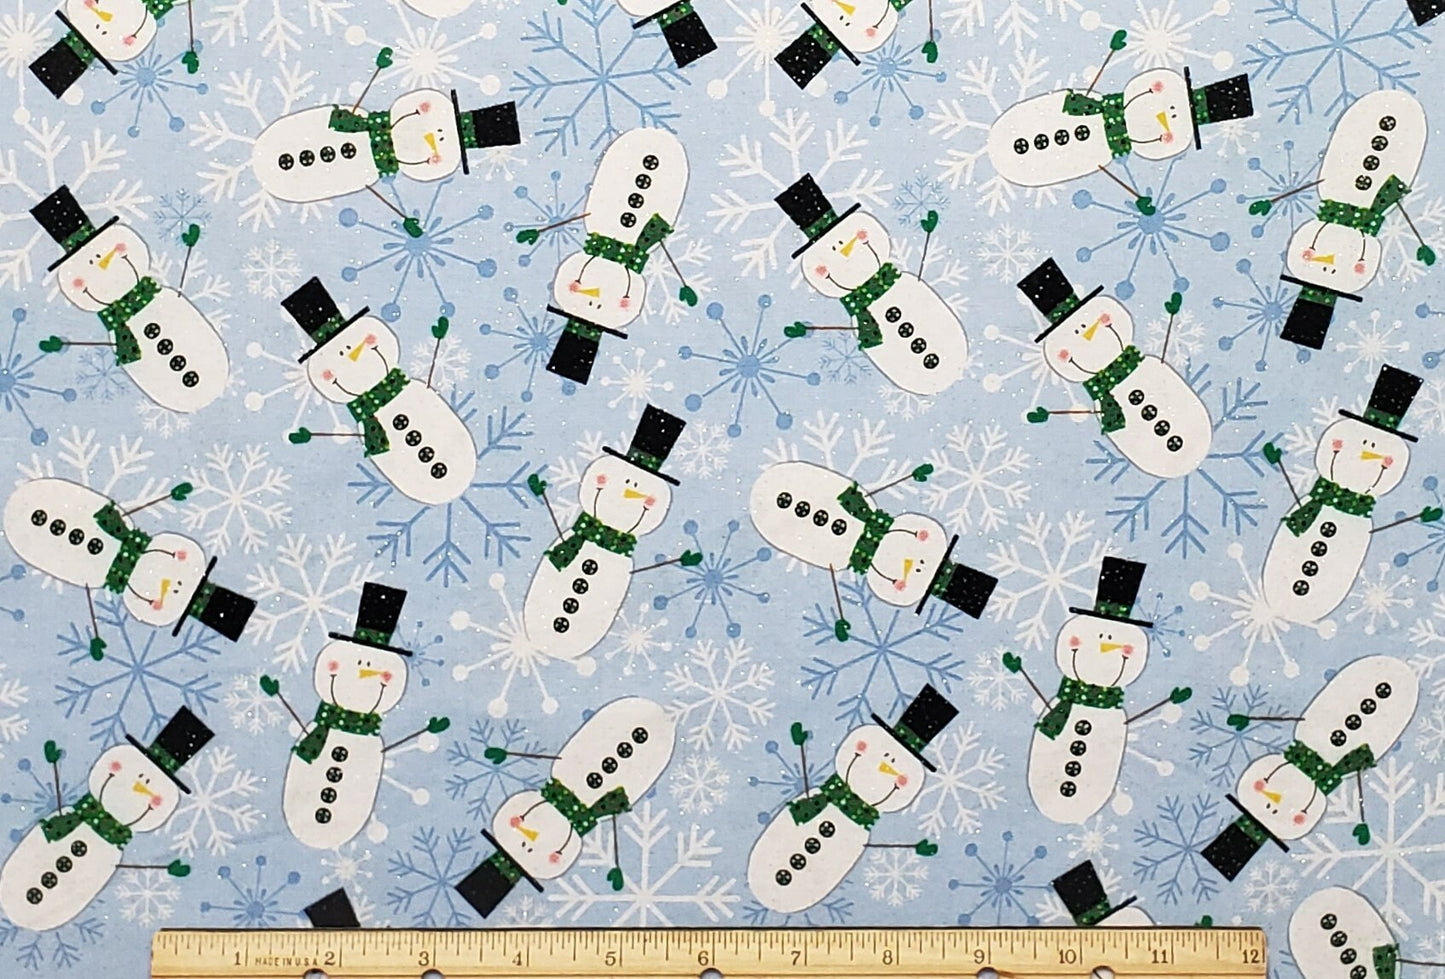 EOB - Designed and Produced Exclusively for JoAnn Fabric and Craft Stores - Light Blue Fabric / White and Blue Snowflake Pattern / Snowmen